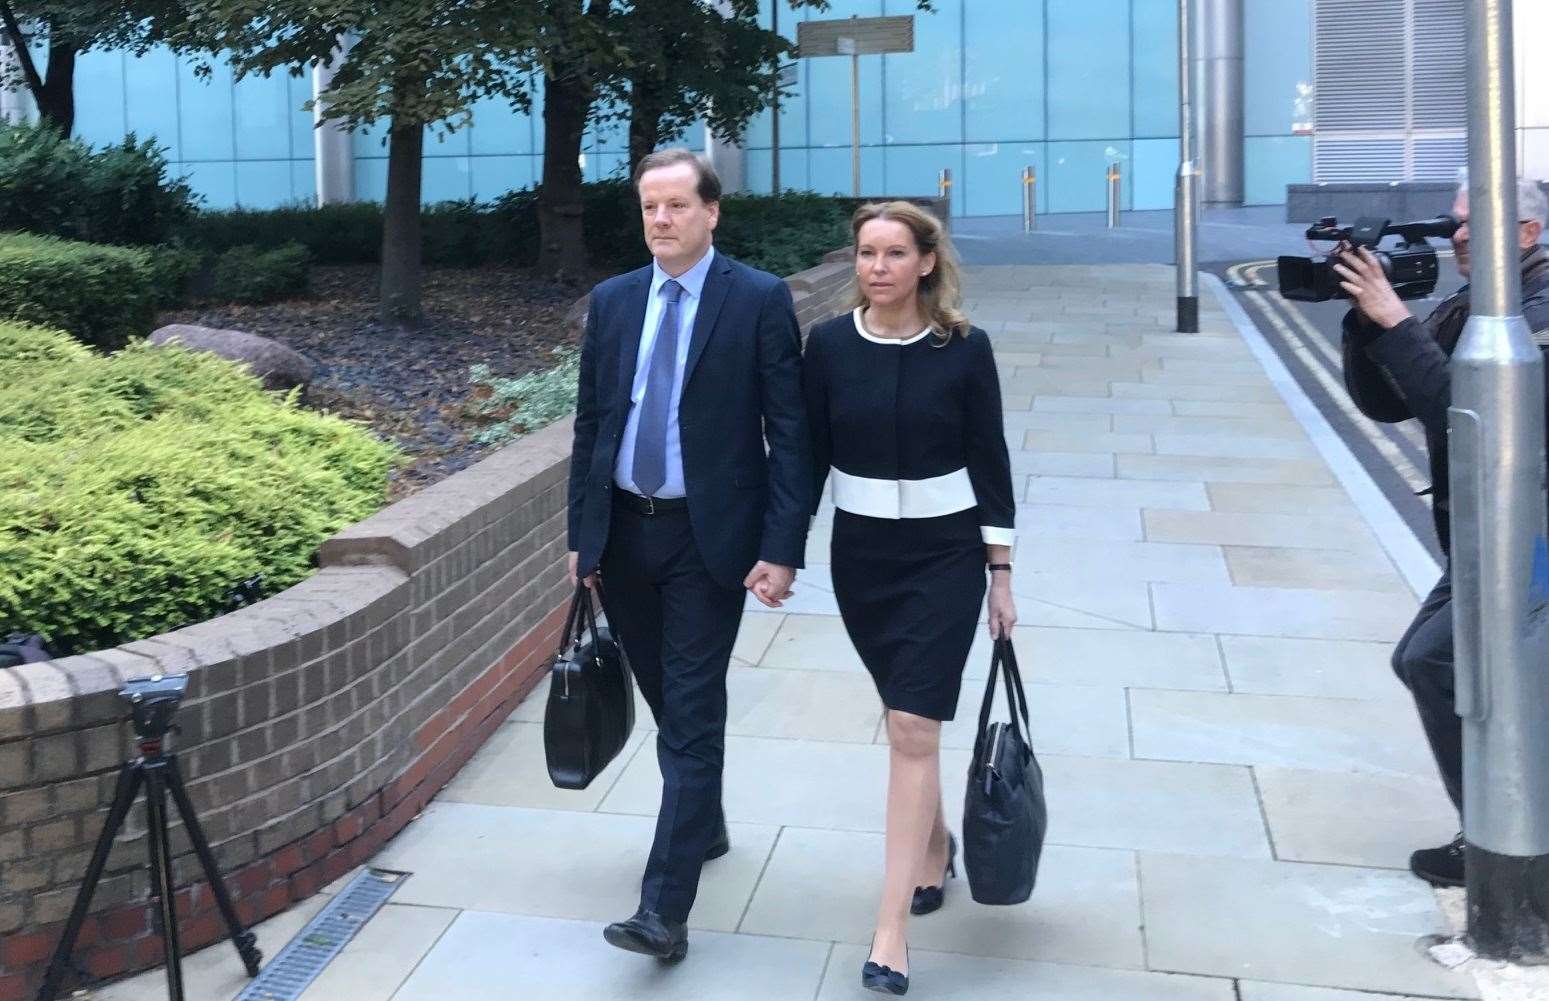 Charlie Elphicke and wife Natalie arrive at Southwark Crown Court in July 2020 during his trial